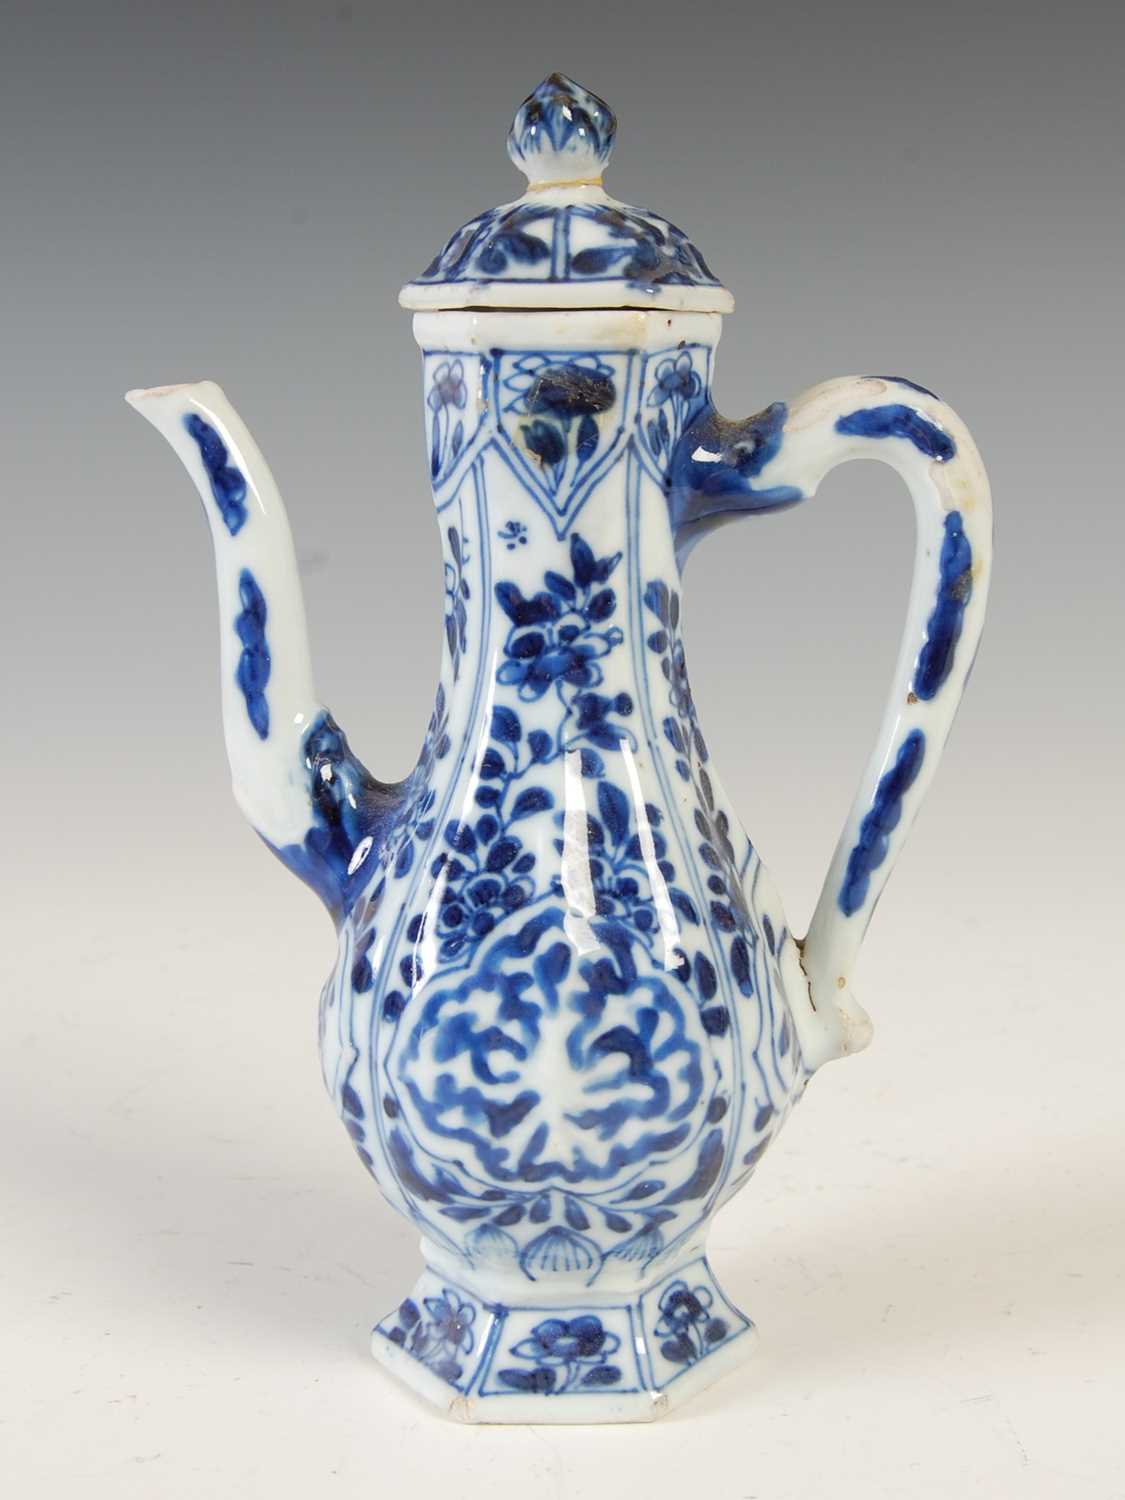 A Chinese porcelain blue and white hexagonal shaped ewer and cover, Qing Dynasty, decorated with